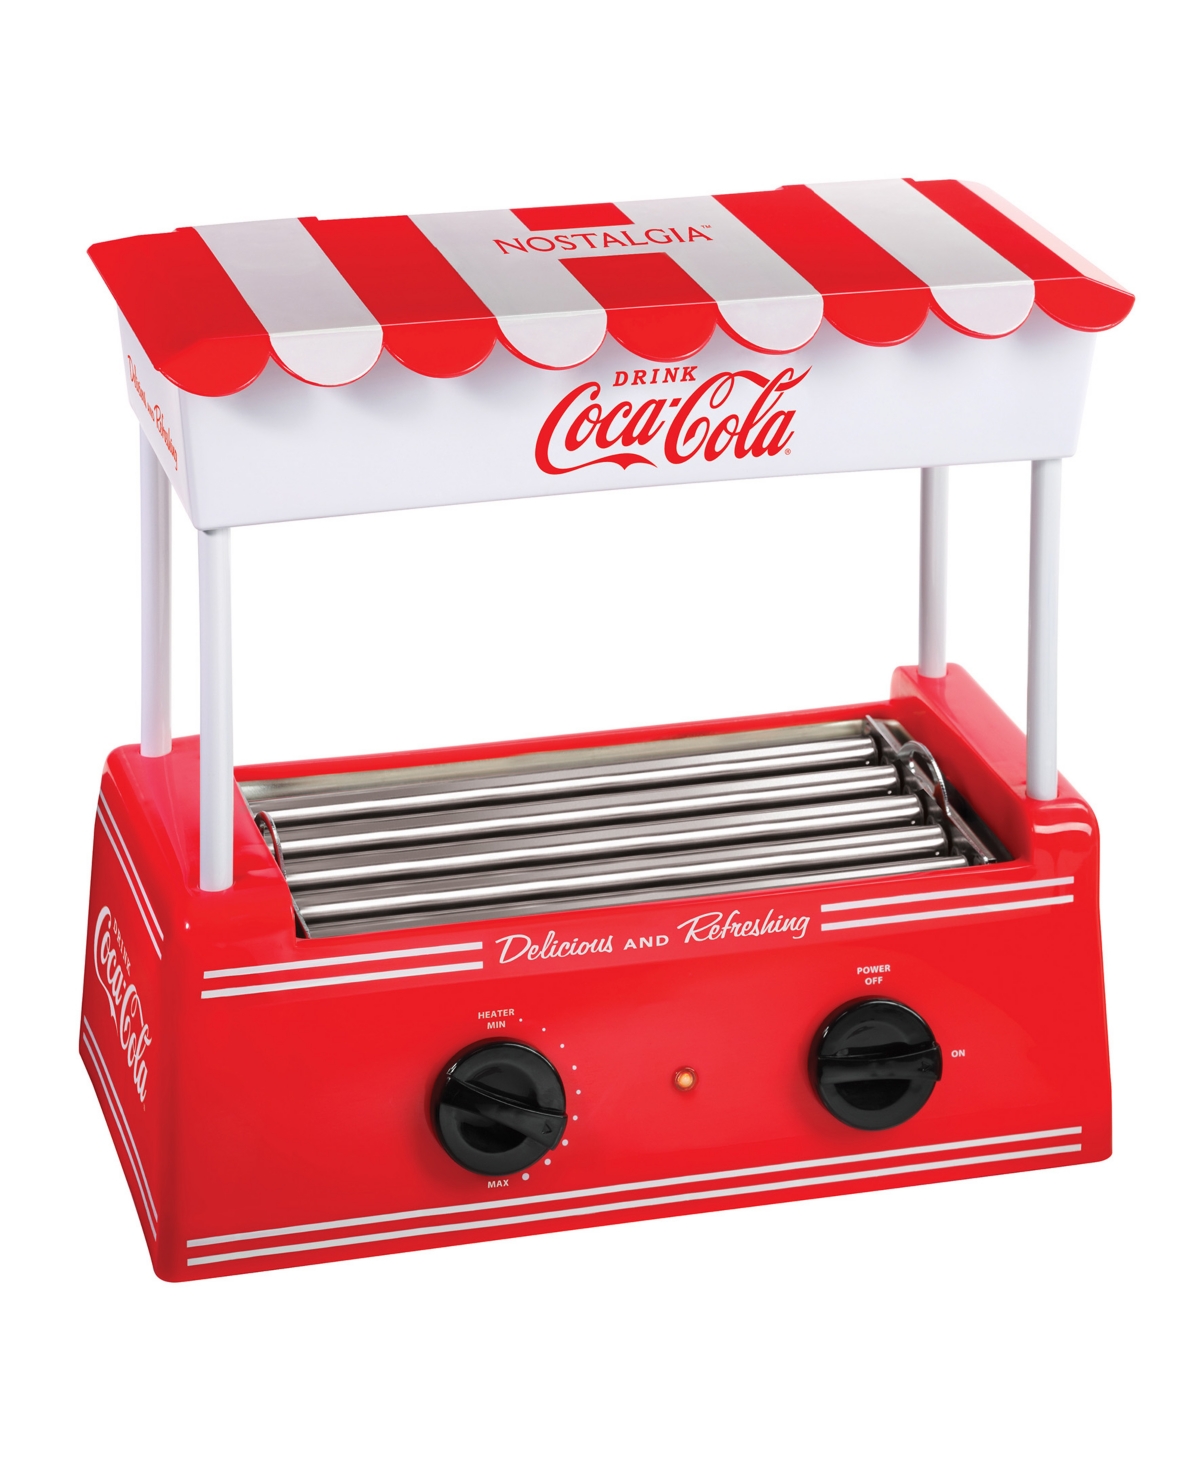 Coca-cola 8 Hot Dog And 6 Bun Capacity, Hot Dog Roller And Bun Warmer In Red